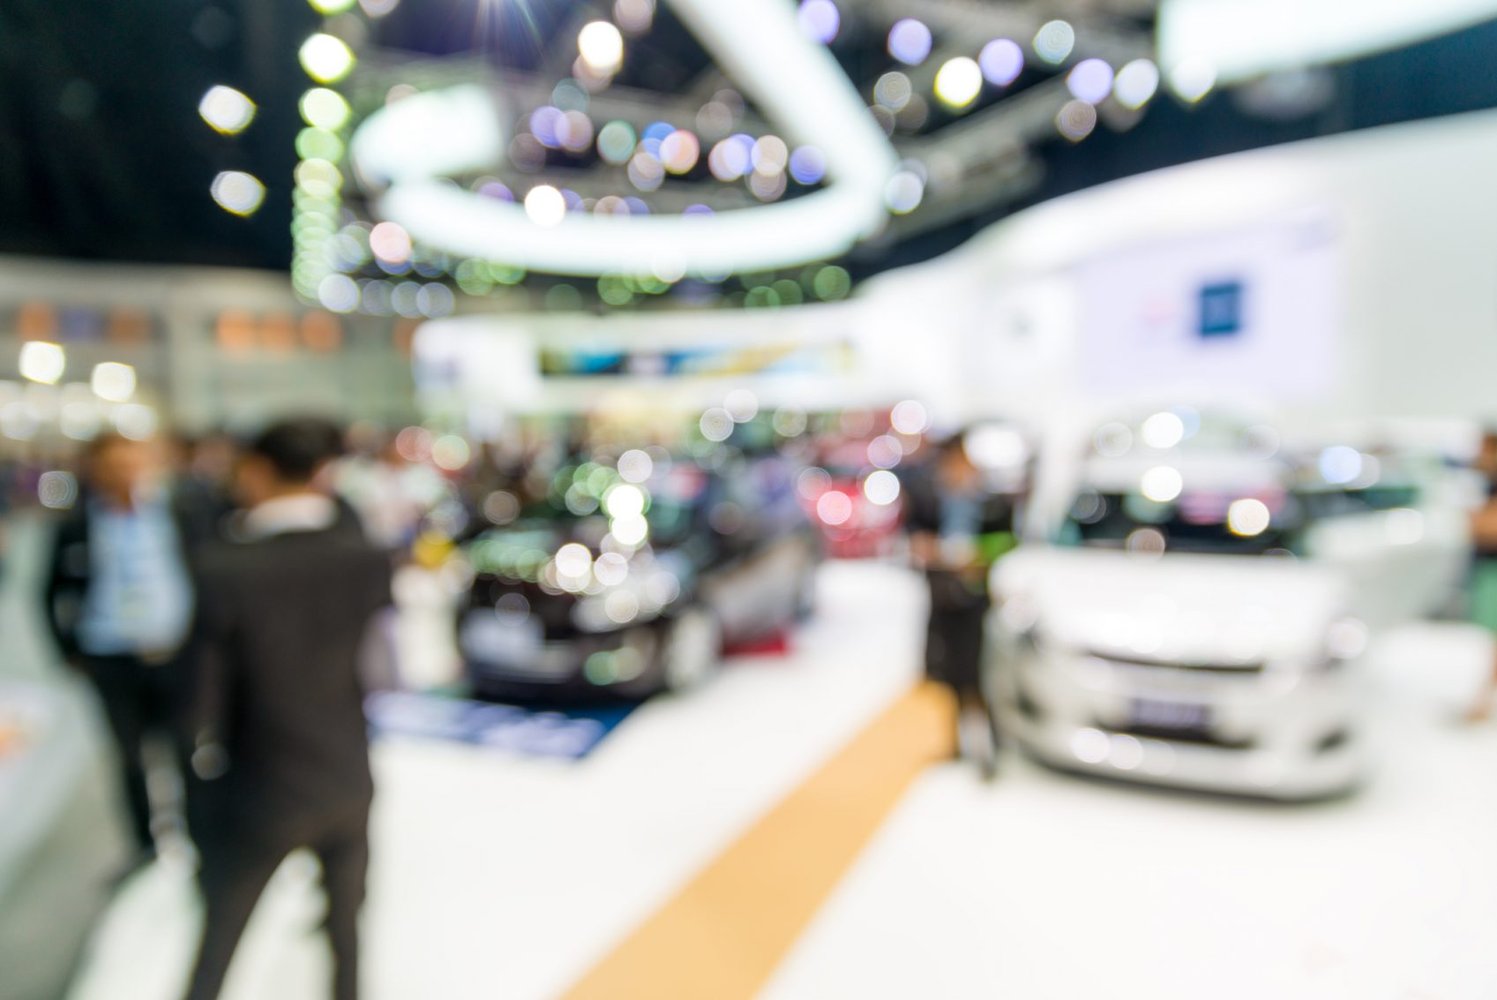 Blurry image of automotive trade show